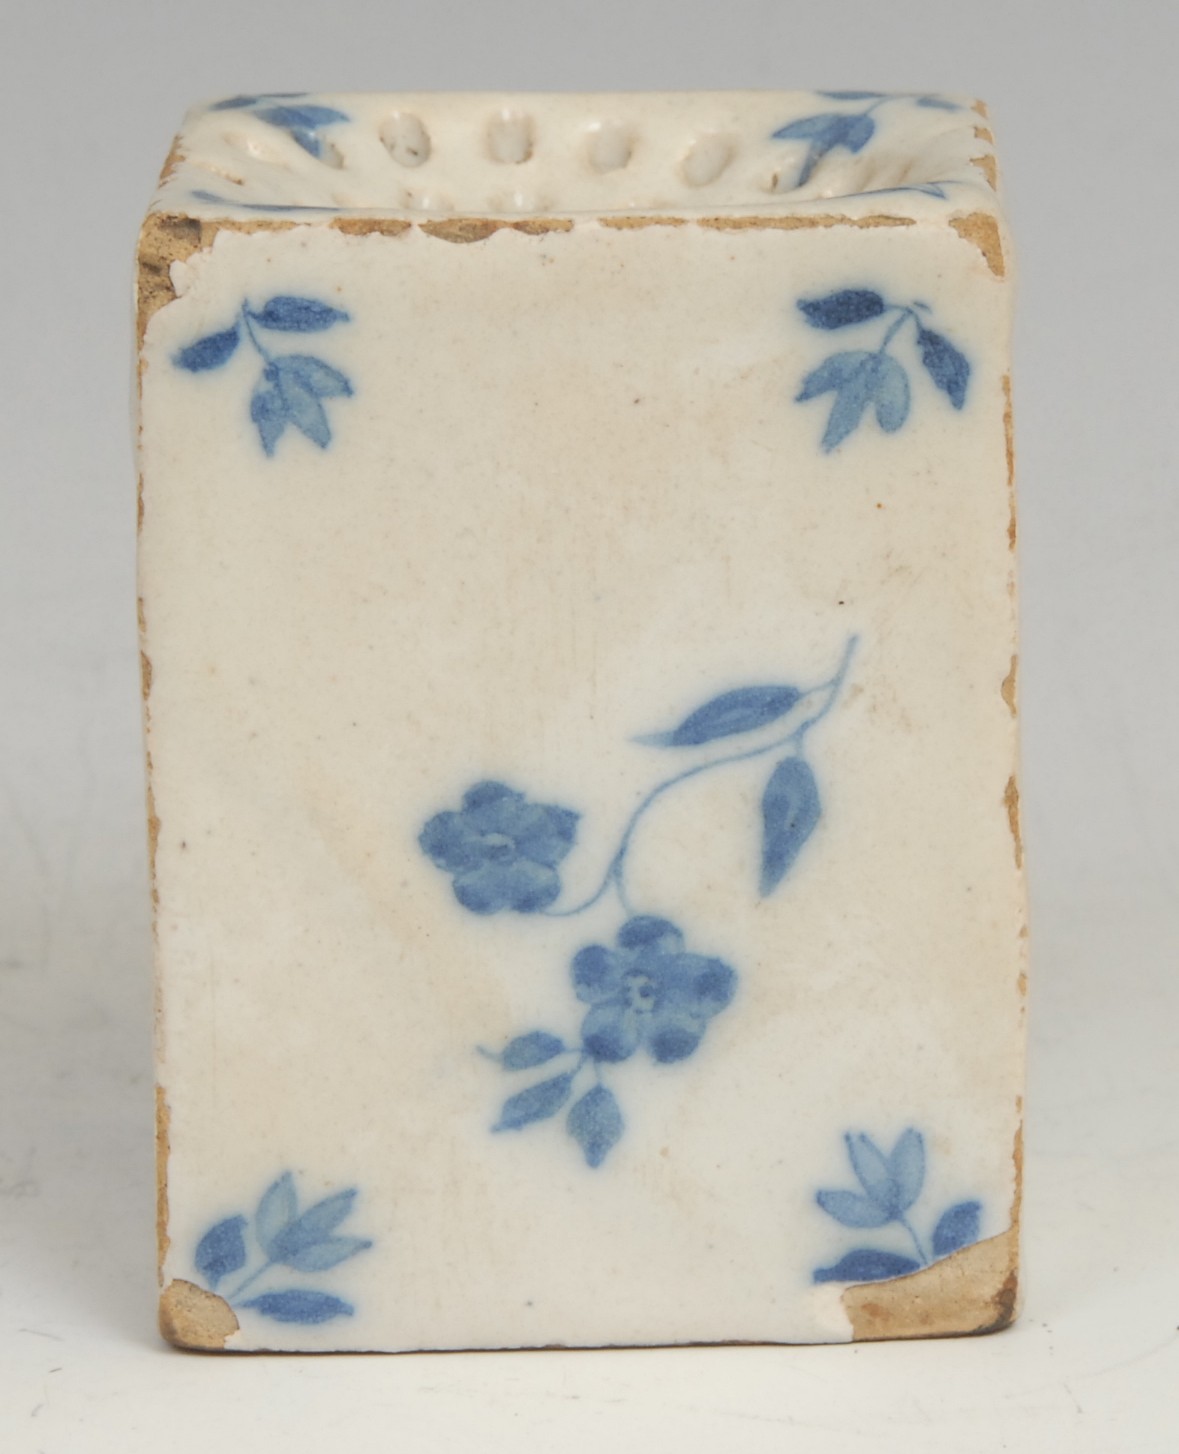 An 18th century Delft square pounce pot, painted in tones of blue with scattered floral sprigs, - Image 5 of 5